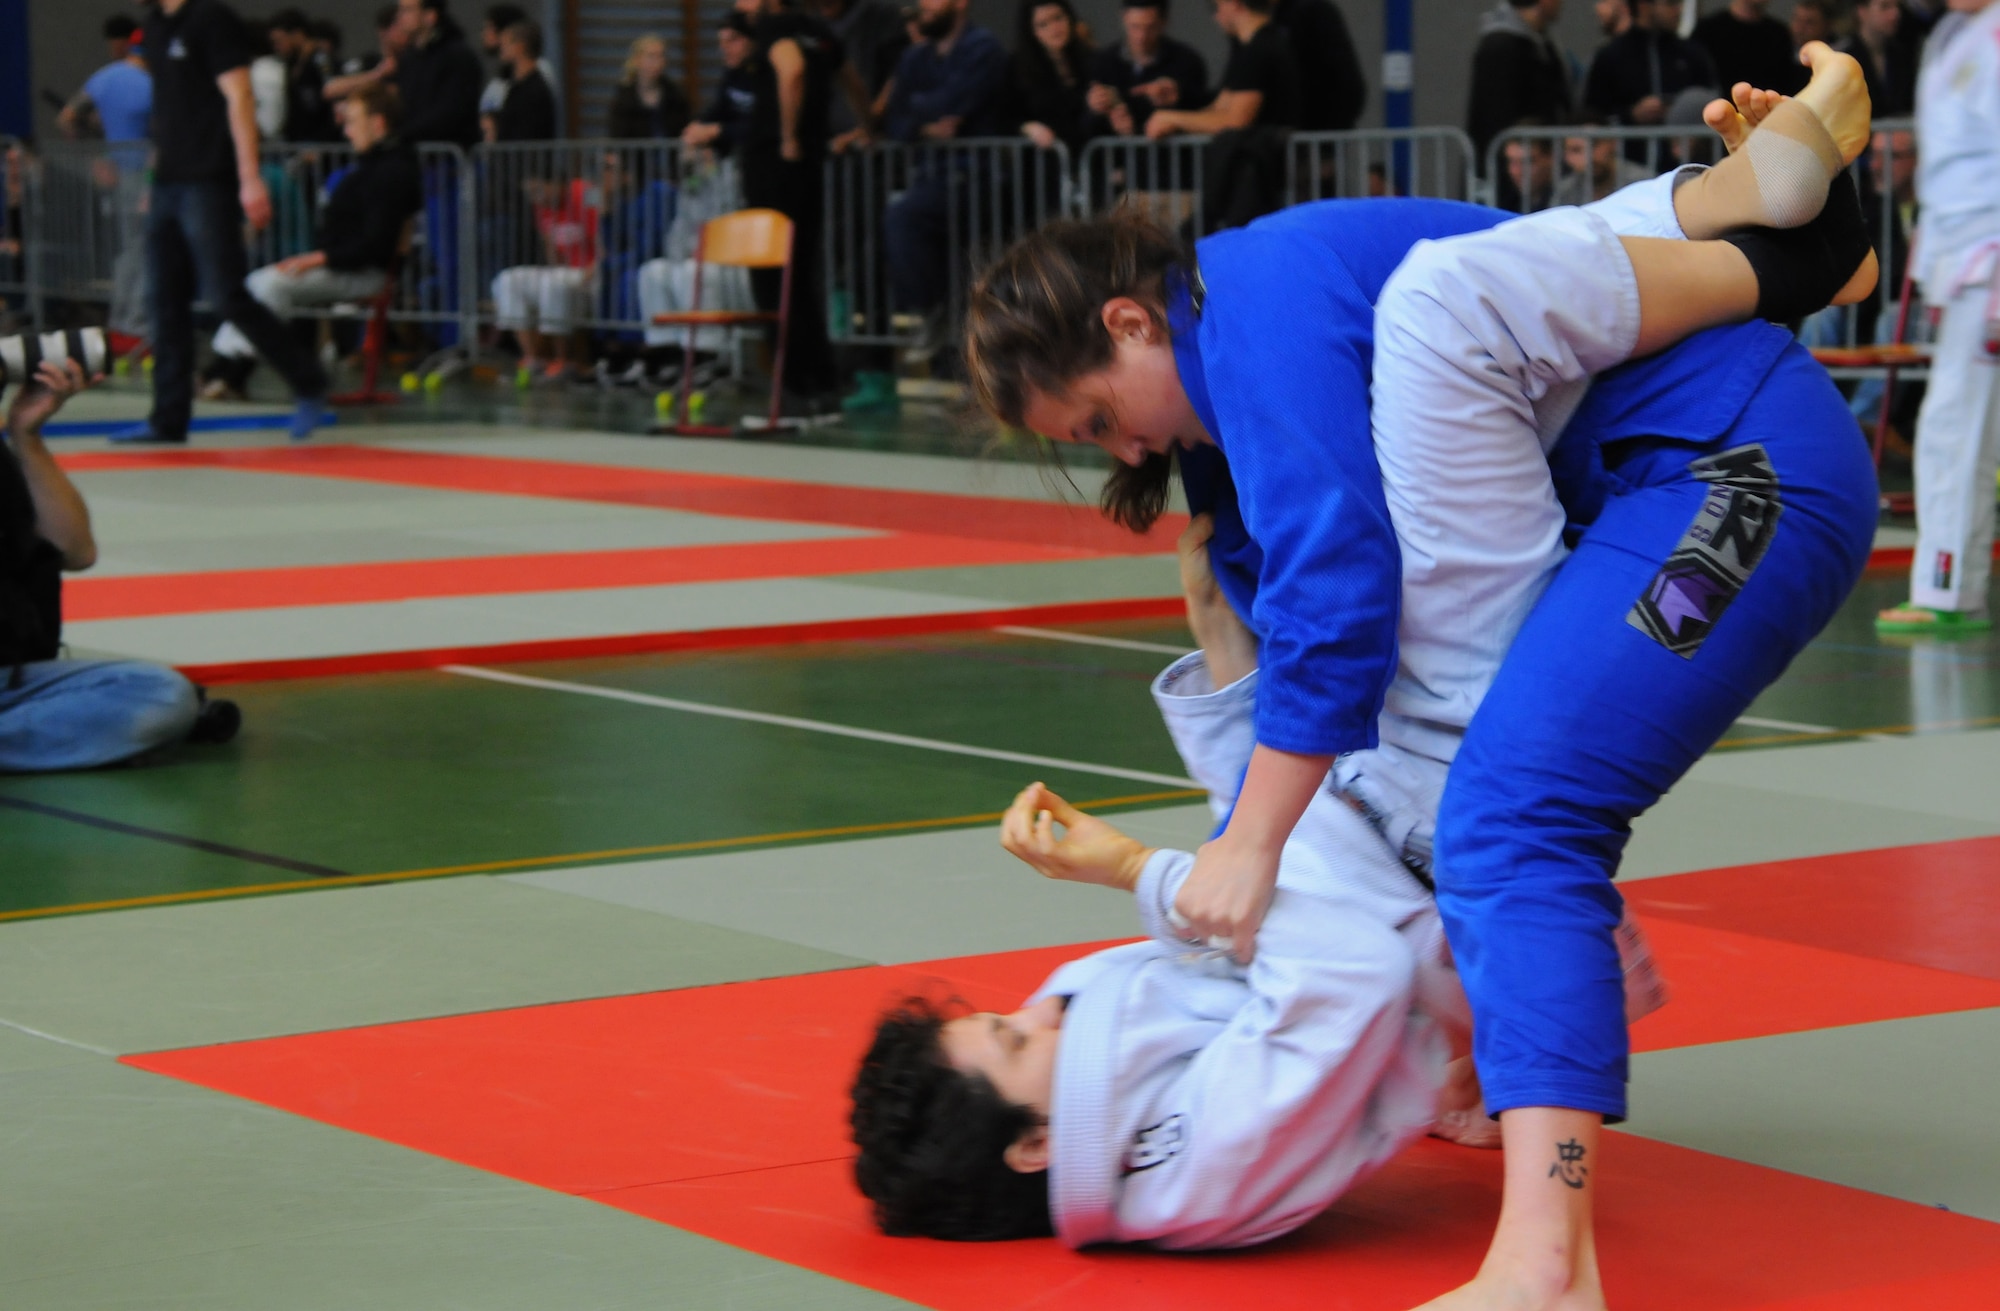 Mariah Johnson, a 52nd Force Support Squadron value-added tax officer who practices Brazilian jiujitsu, right, grapples during her first match at the Submissao competition in Karlsruhe, Germany, Feb. 20, 2016. Johnson lost to her opponent, but received a belt promotion after the match for taking the step to compete. (Courtesy photo)